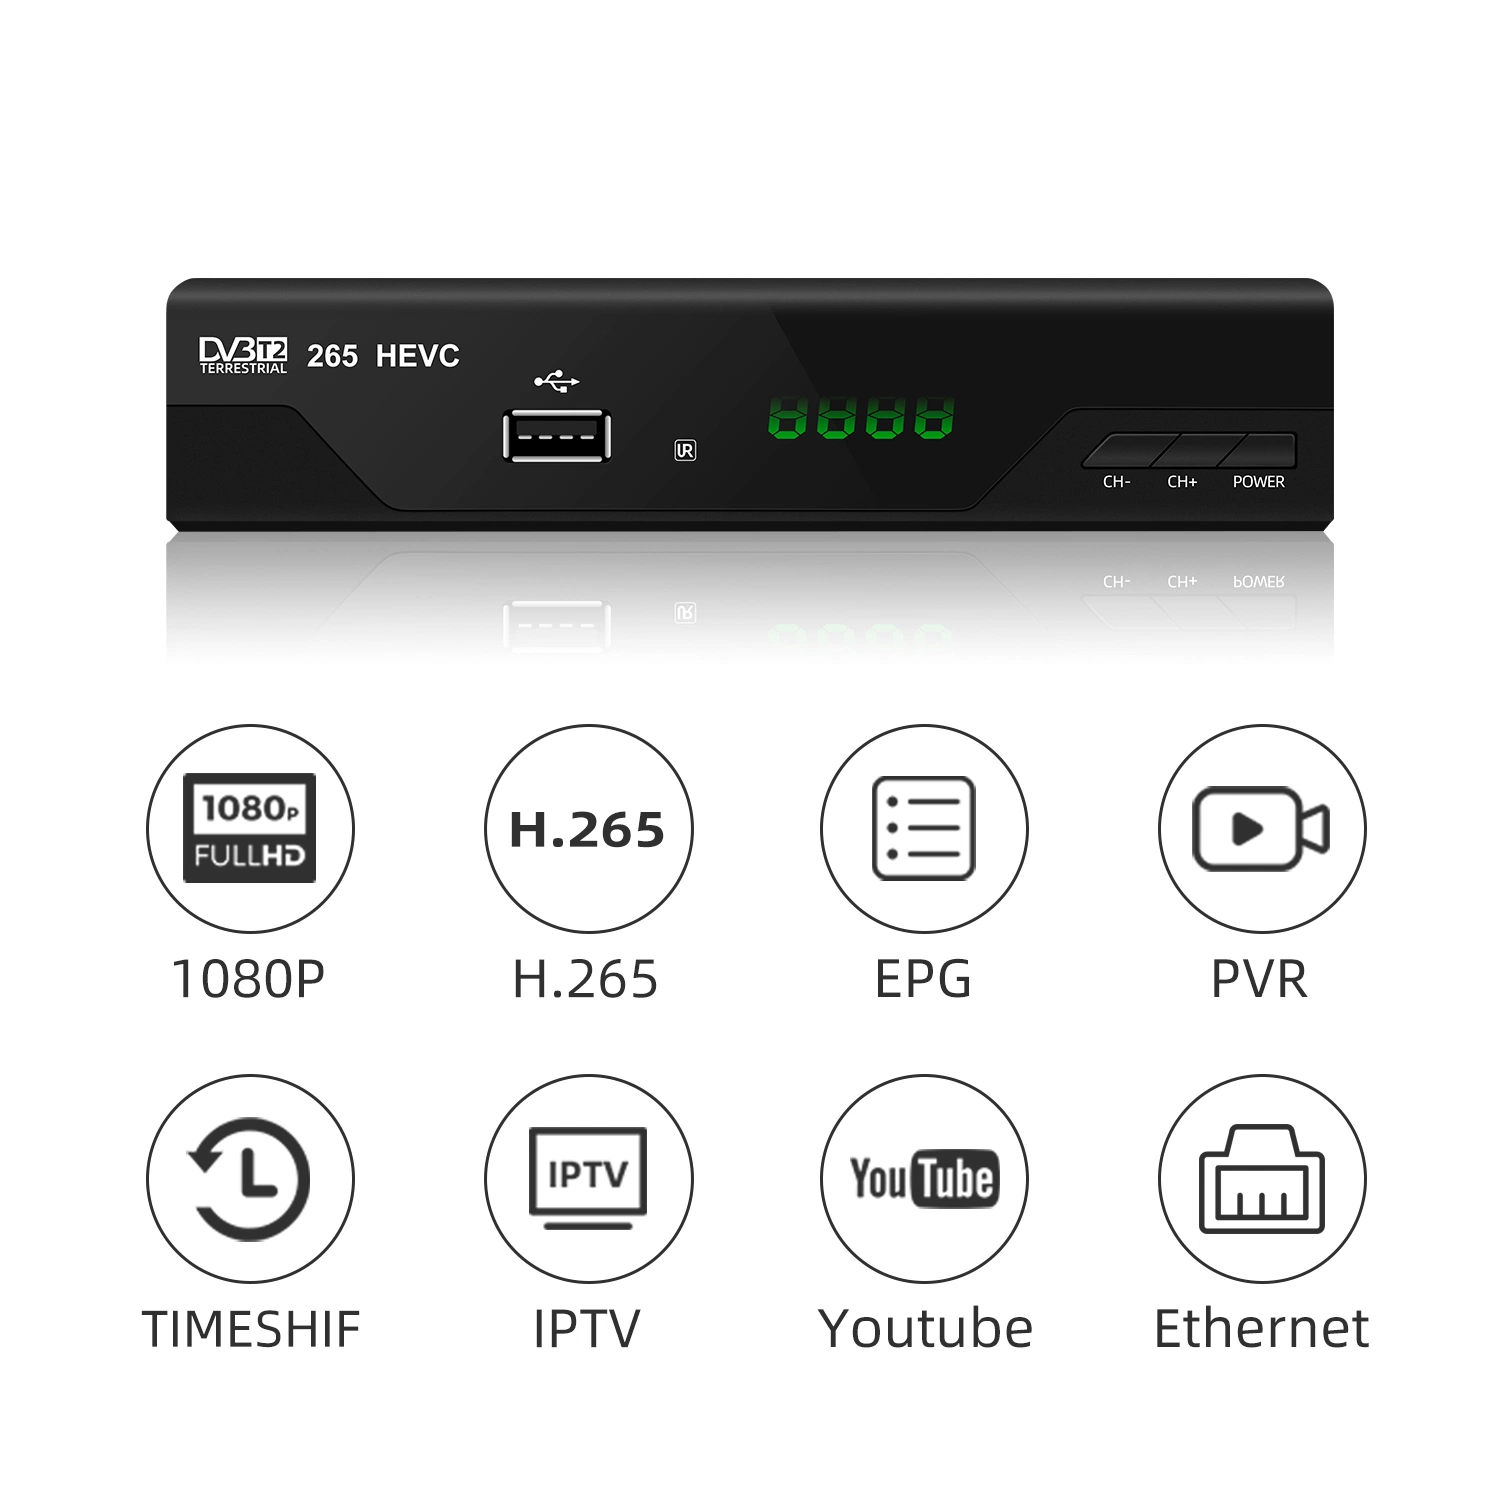 Set Top Box DVB T2 H. 265 Hevc Digital TV Receiver Support Ethernet Italy